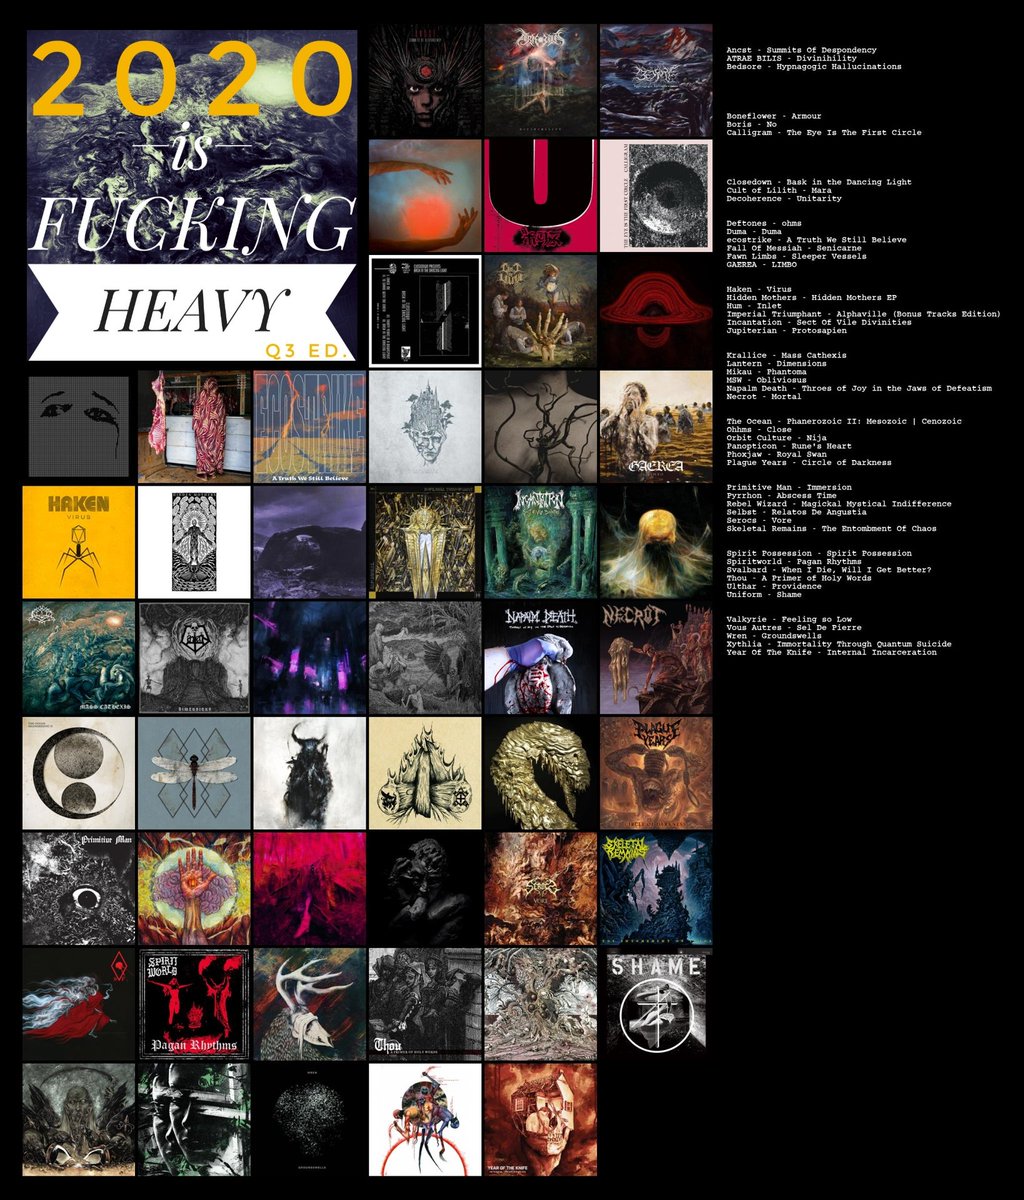 2020 IS F**KING HEAVY! END OF Q3 EDITION WITH 50 MORE OF THE BEST DM, BM, DOOM, SCREAMO, HARDCORE, NOISE, ETC. ALBUMS OF THE YEAR SUPPORT THESE ARTISTS THIS #BANDCAMPFRIDAY (LINKS TO FOLLOW IN THREAD) TASTER PLAYLIST: open.spotify.com/playlist/59OcK… I'LL STOP SHOUTING now.